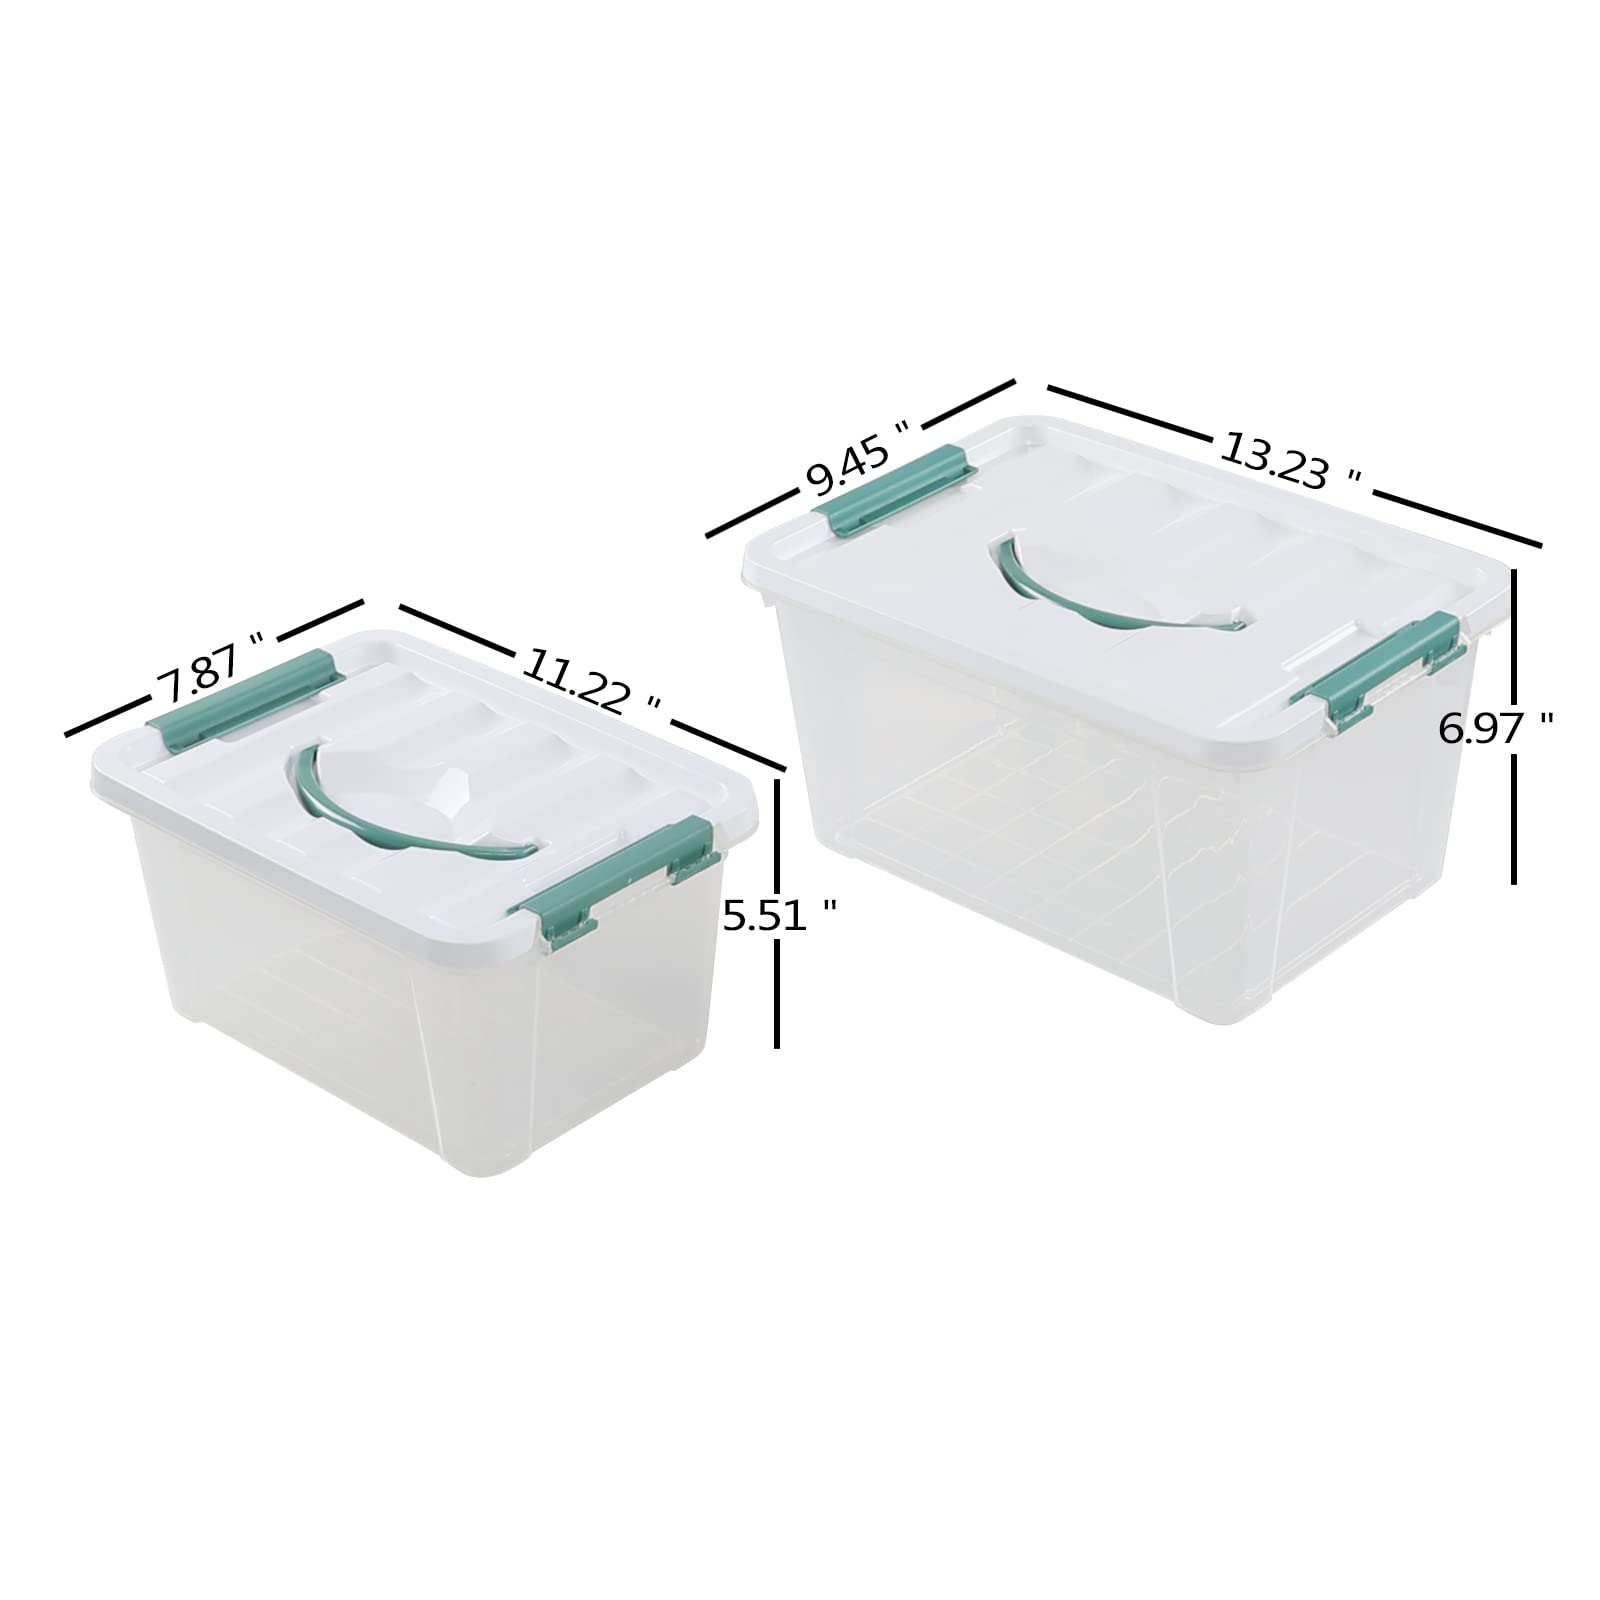 Nesmilers 14 Quarts & 7 Quarts Storage Bins with Lids, 2-pack Clear Plastic Totes Boxes